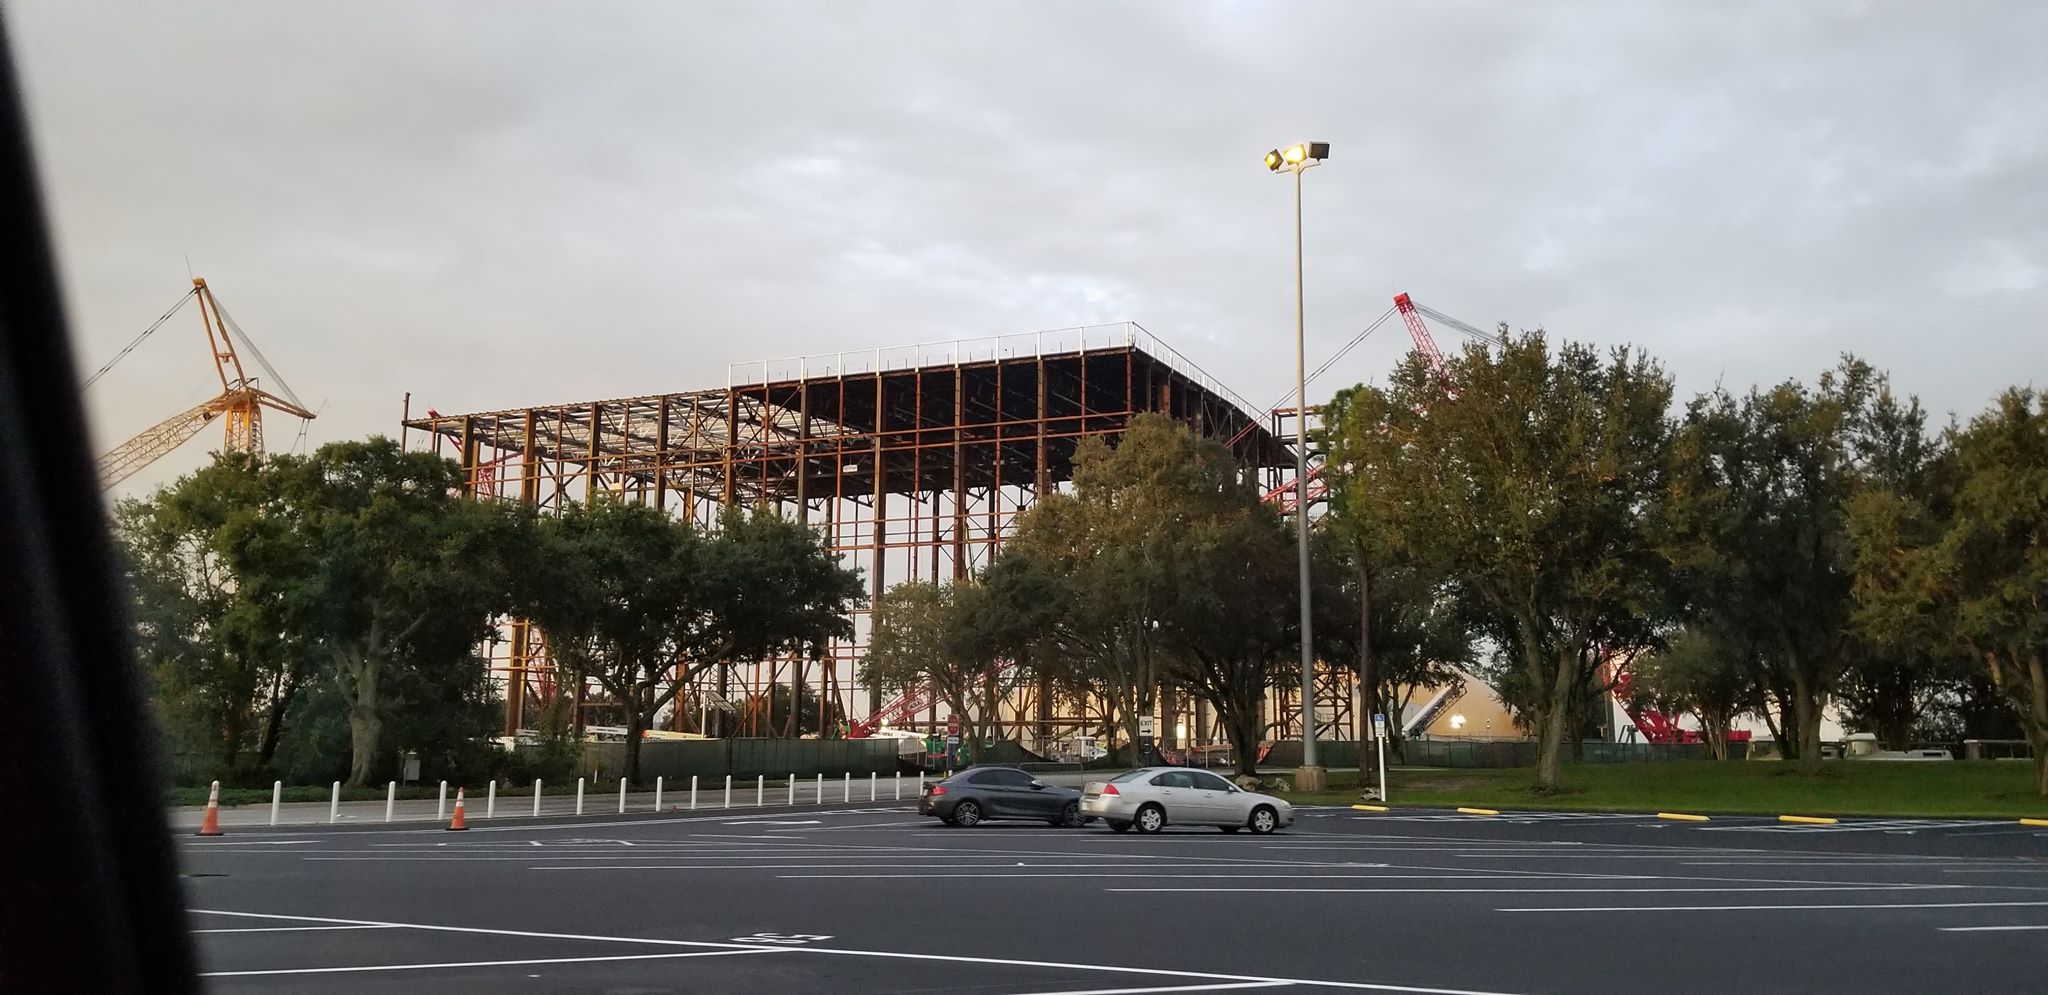 Guardians of the Galaxy Coaster Construction Update